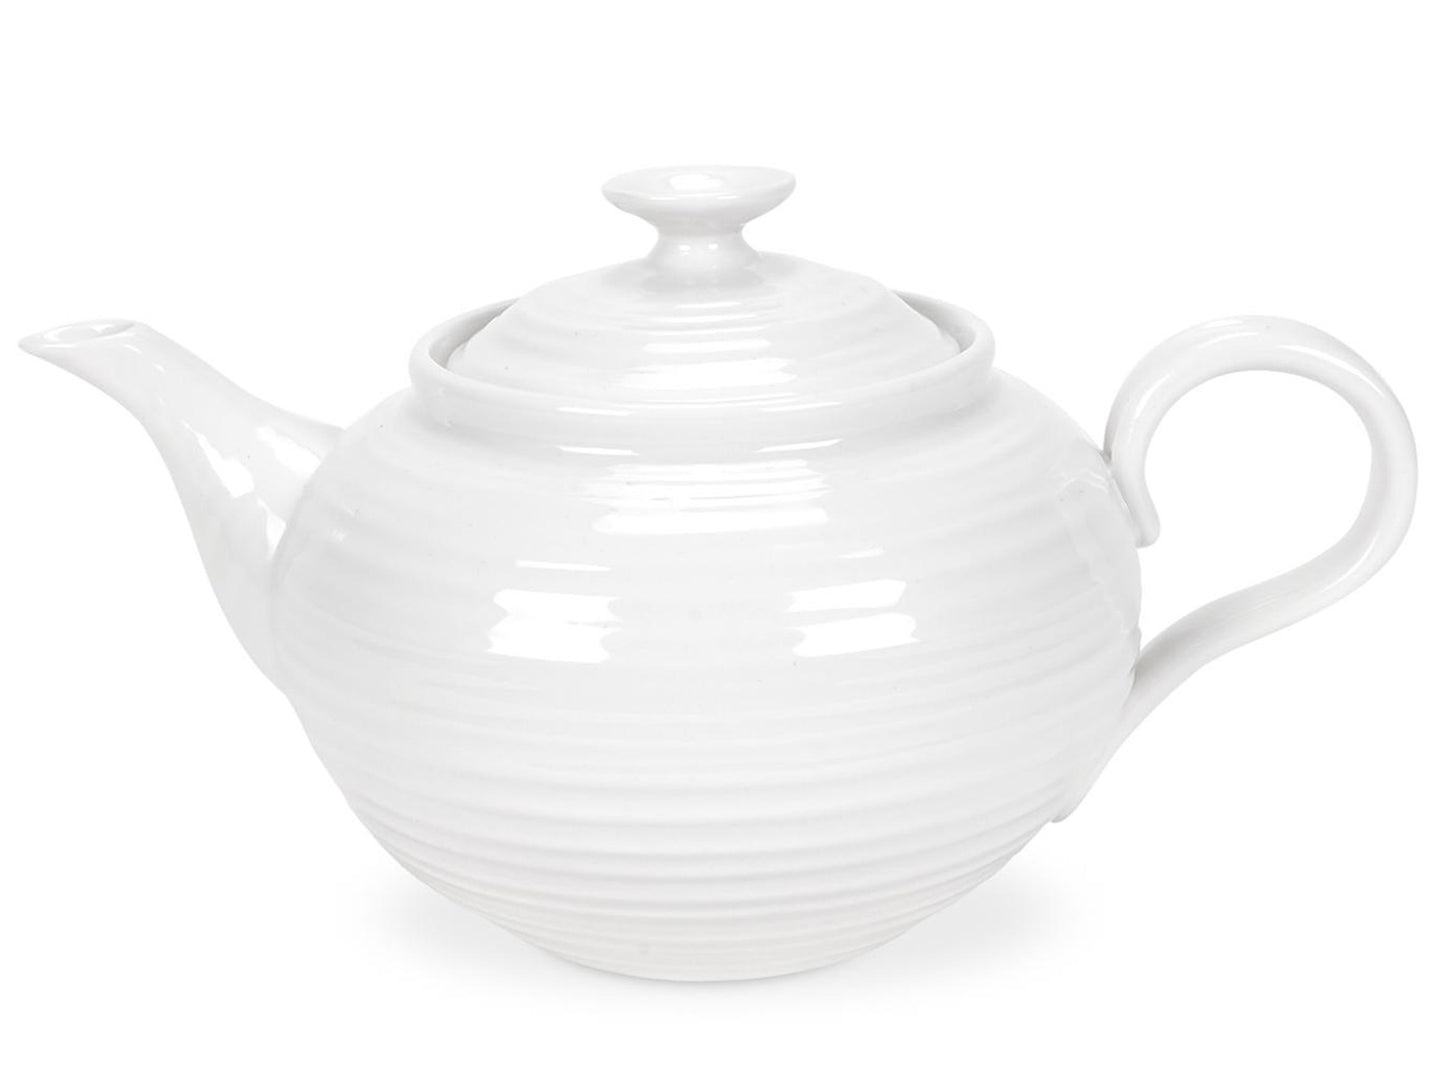 This Sophie Conran teapot has been made from a white porcelain that has been finished in a clear glaze. It is designed with Sophie's textured rippling effect, and holds over 1 litre's worth of tea.